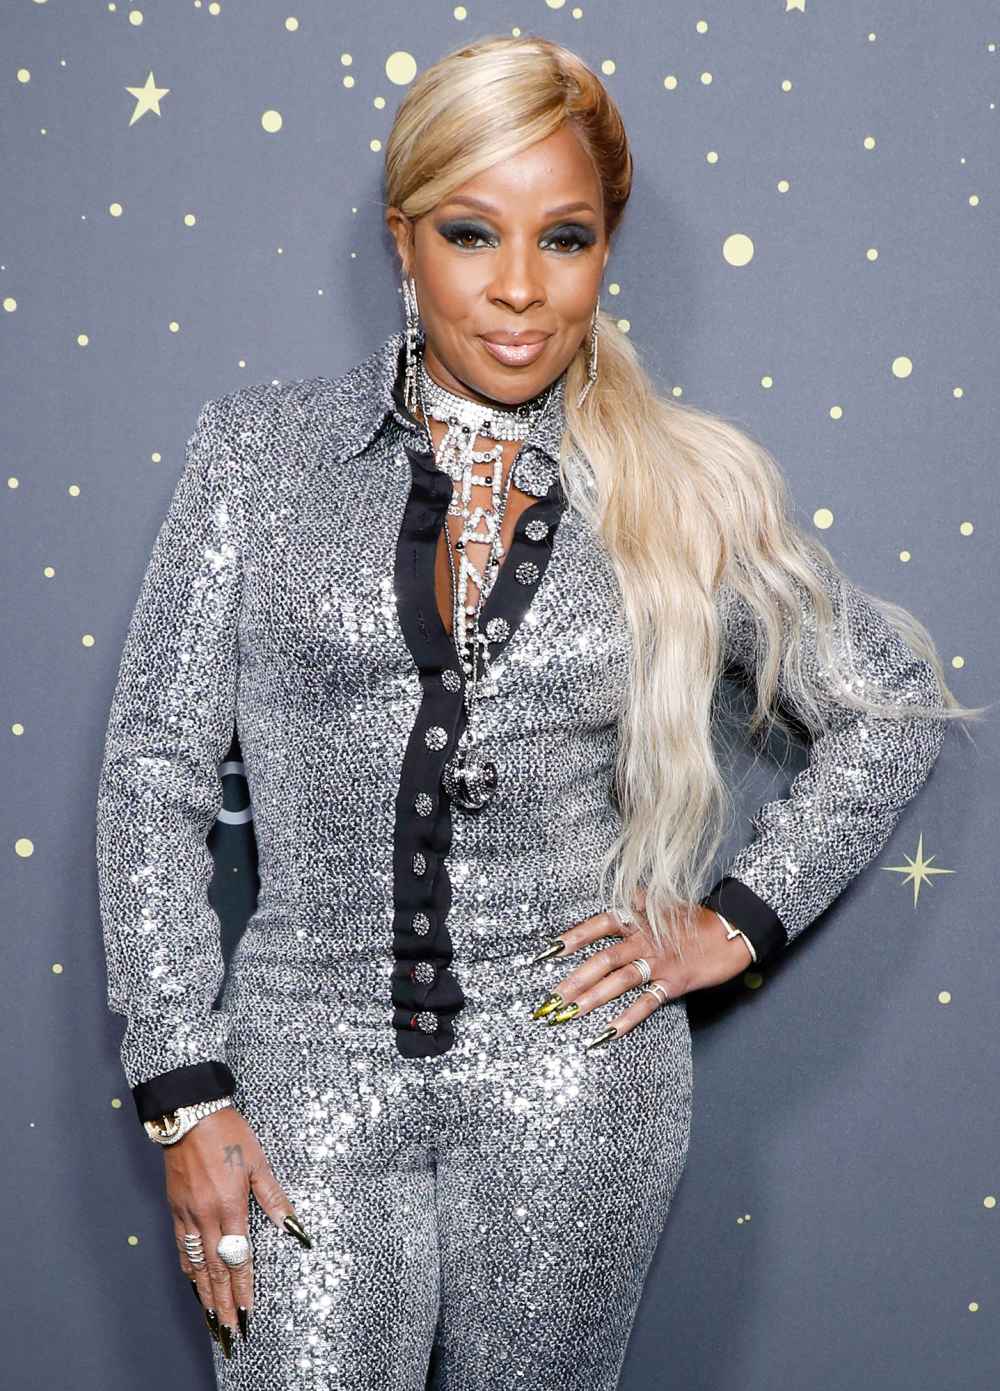 Mary J Bliges Best Knee High Boots of All Time From White Hot Leather to Black Snakeskin